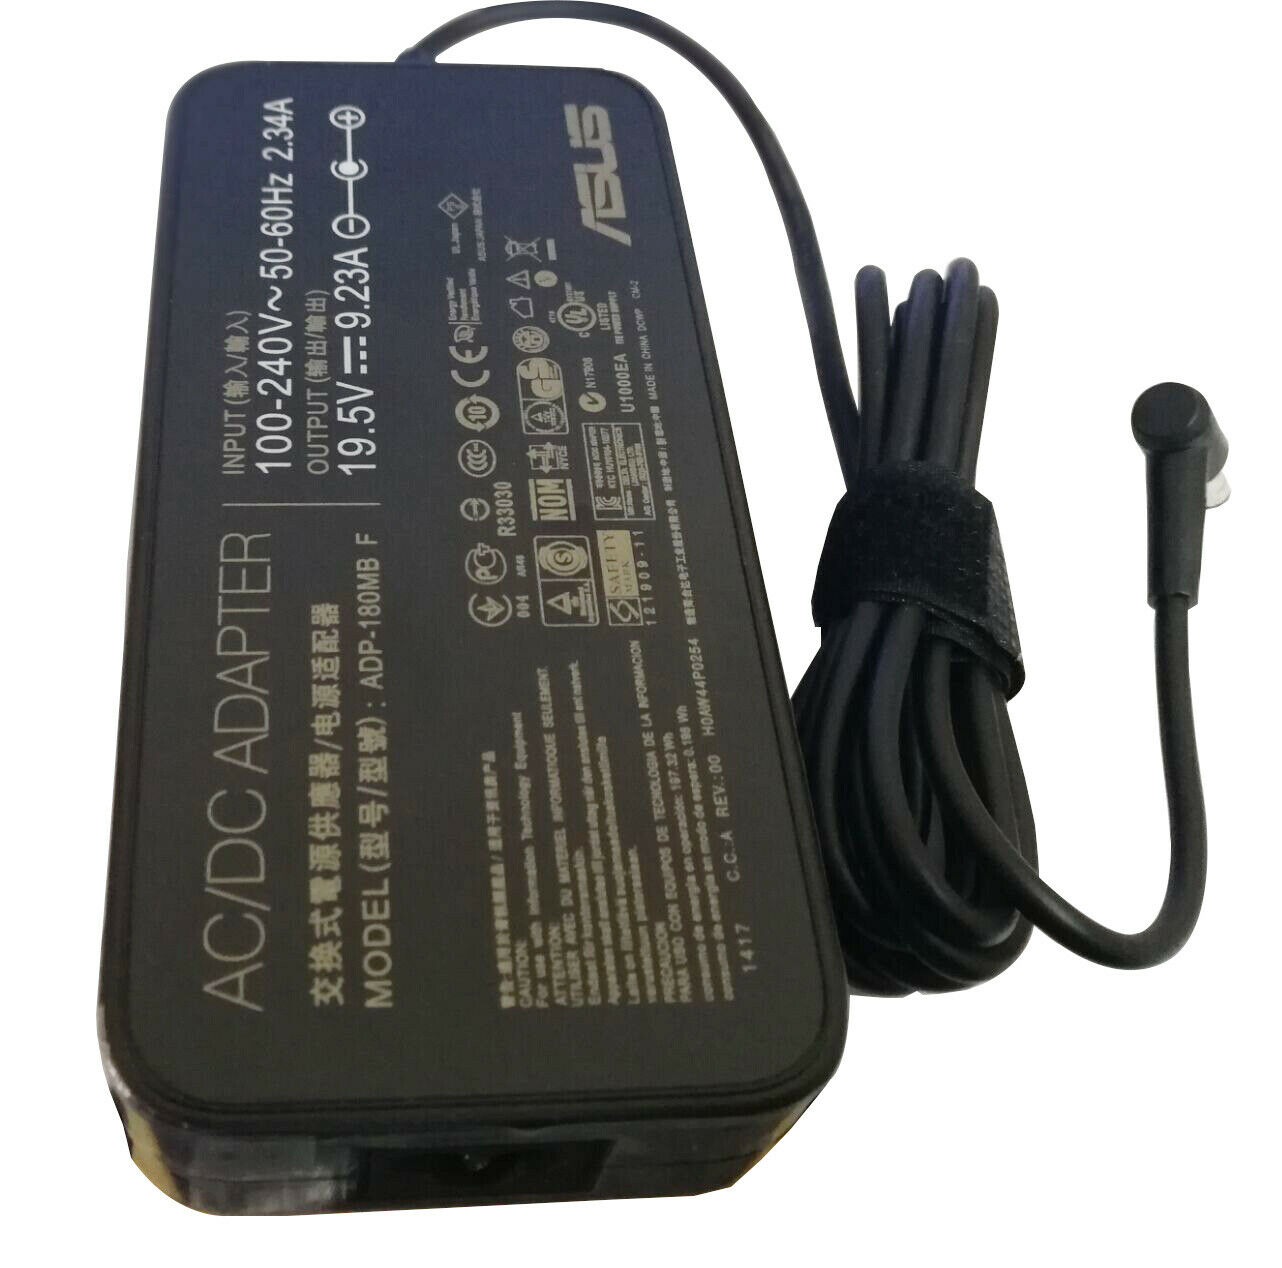 asus g75vw-rs72 laptop ac adapter